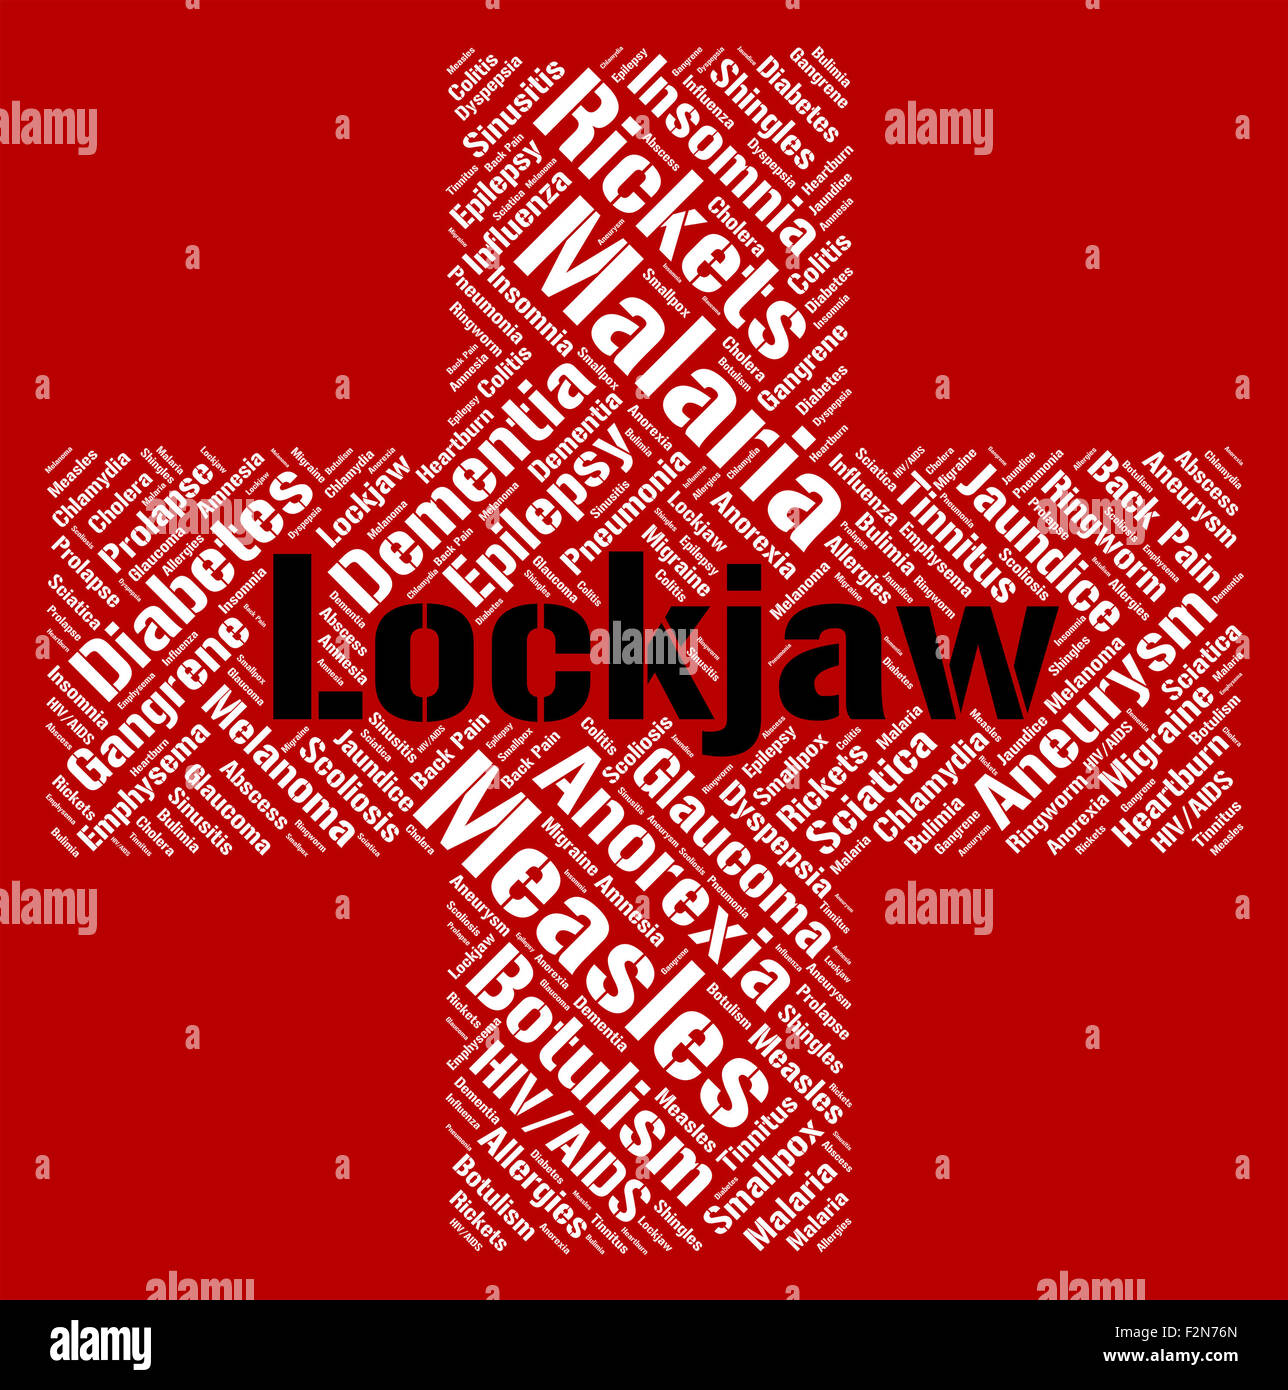 Lockjaw Word Representing Ill Health And Complaint Stock Photo